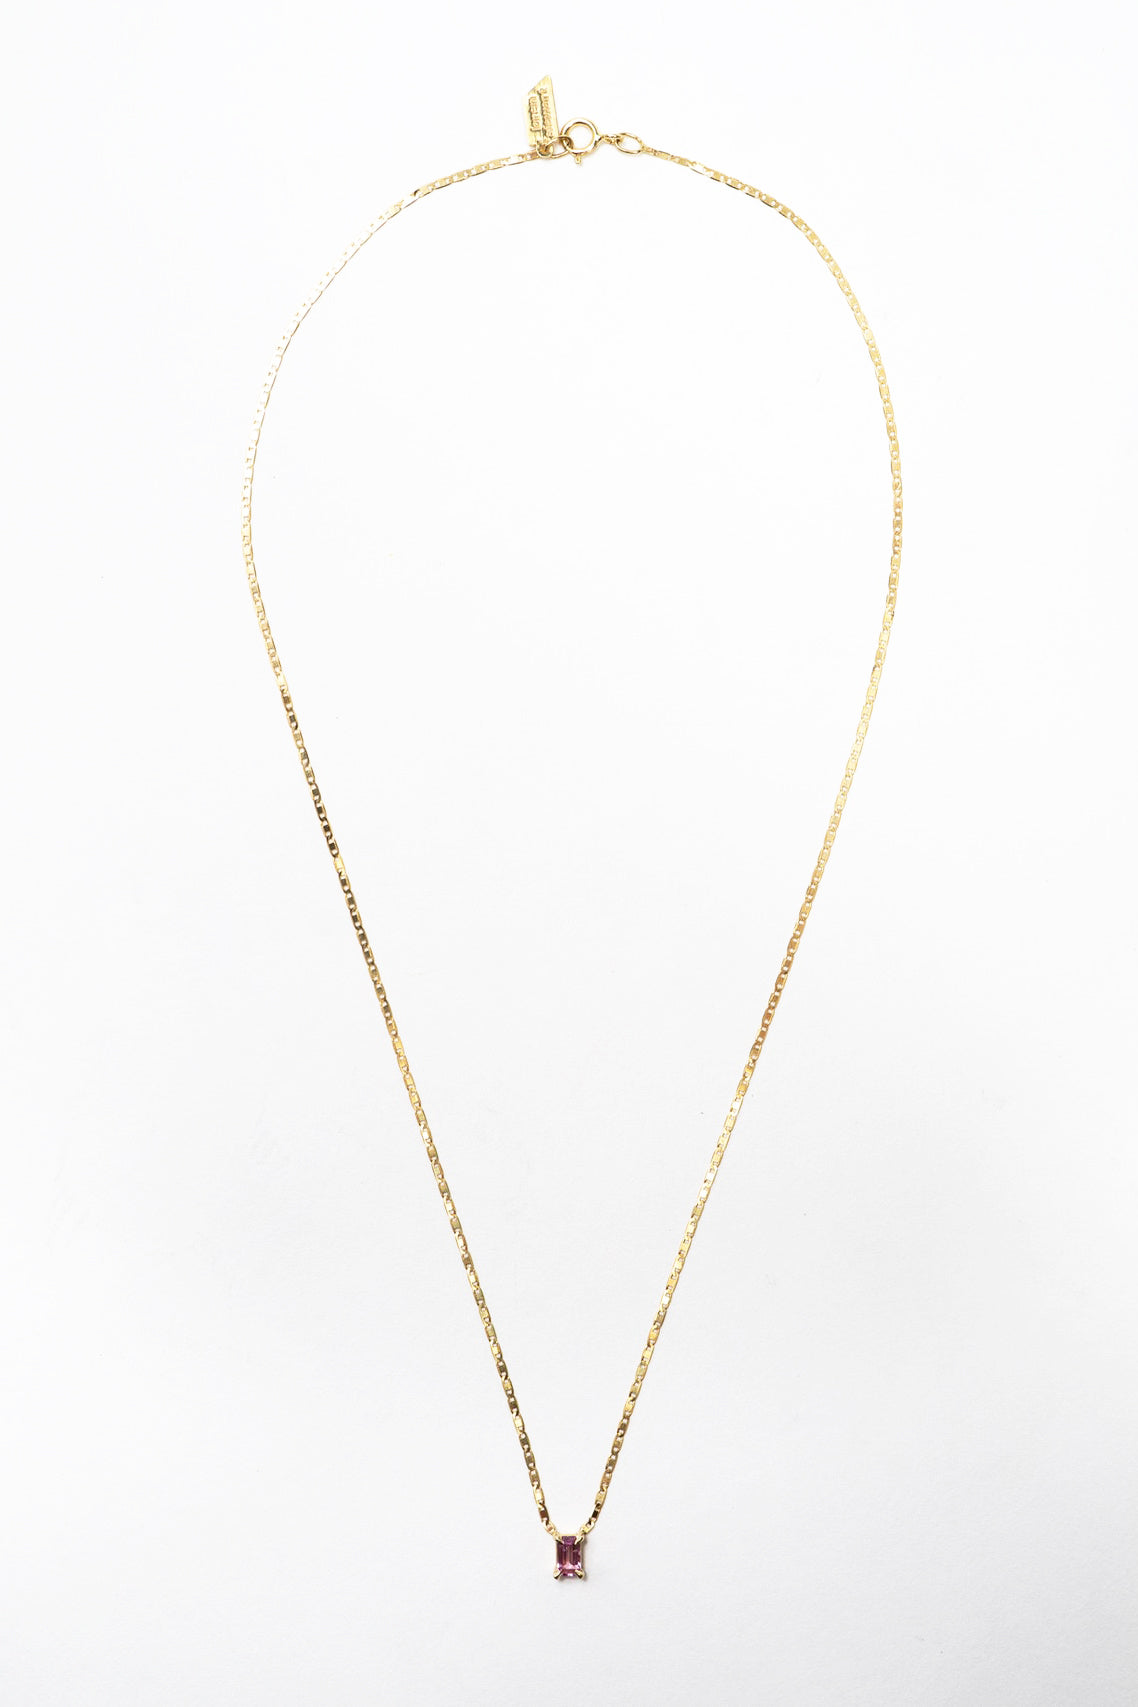 Sapphire Valentino Necklace in 10k Yellow Gold